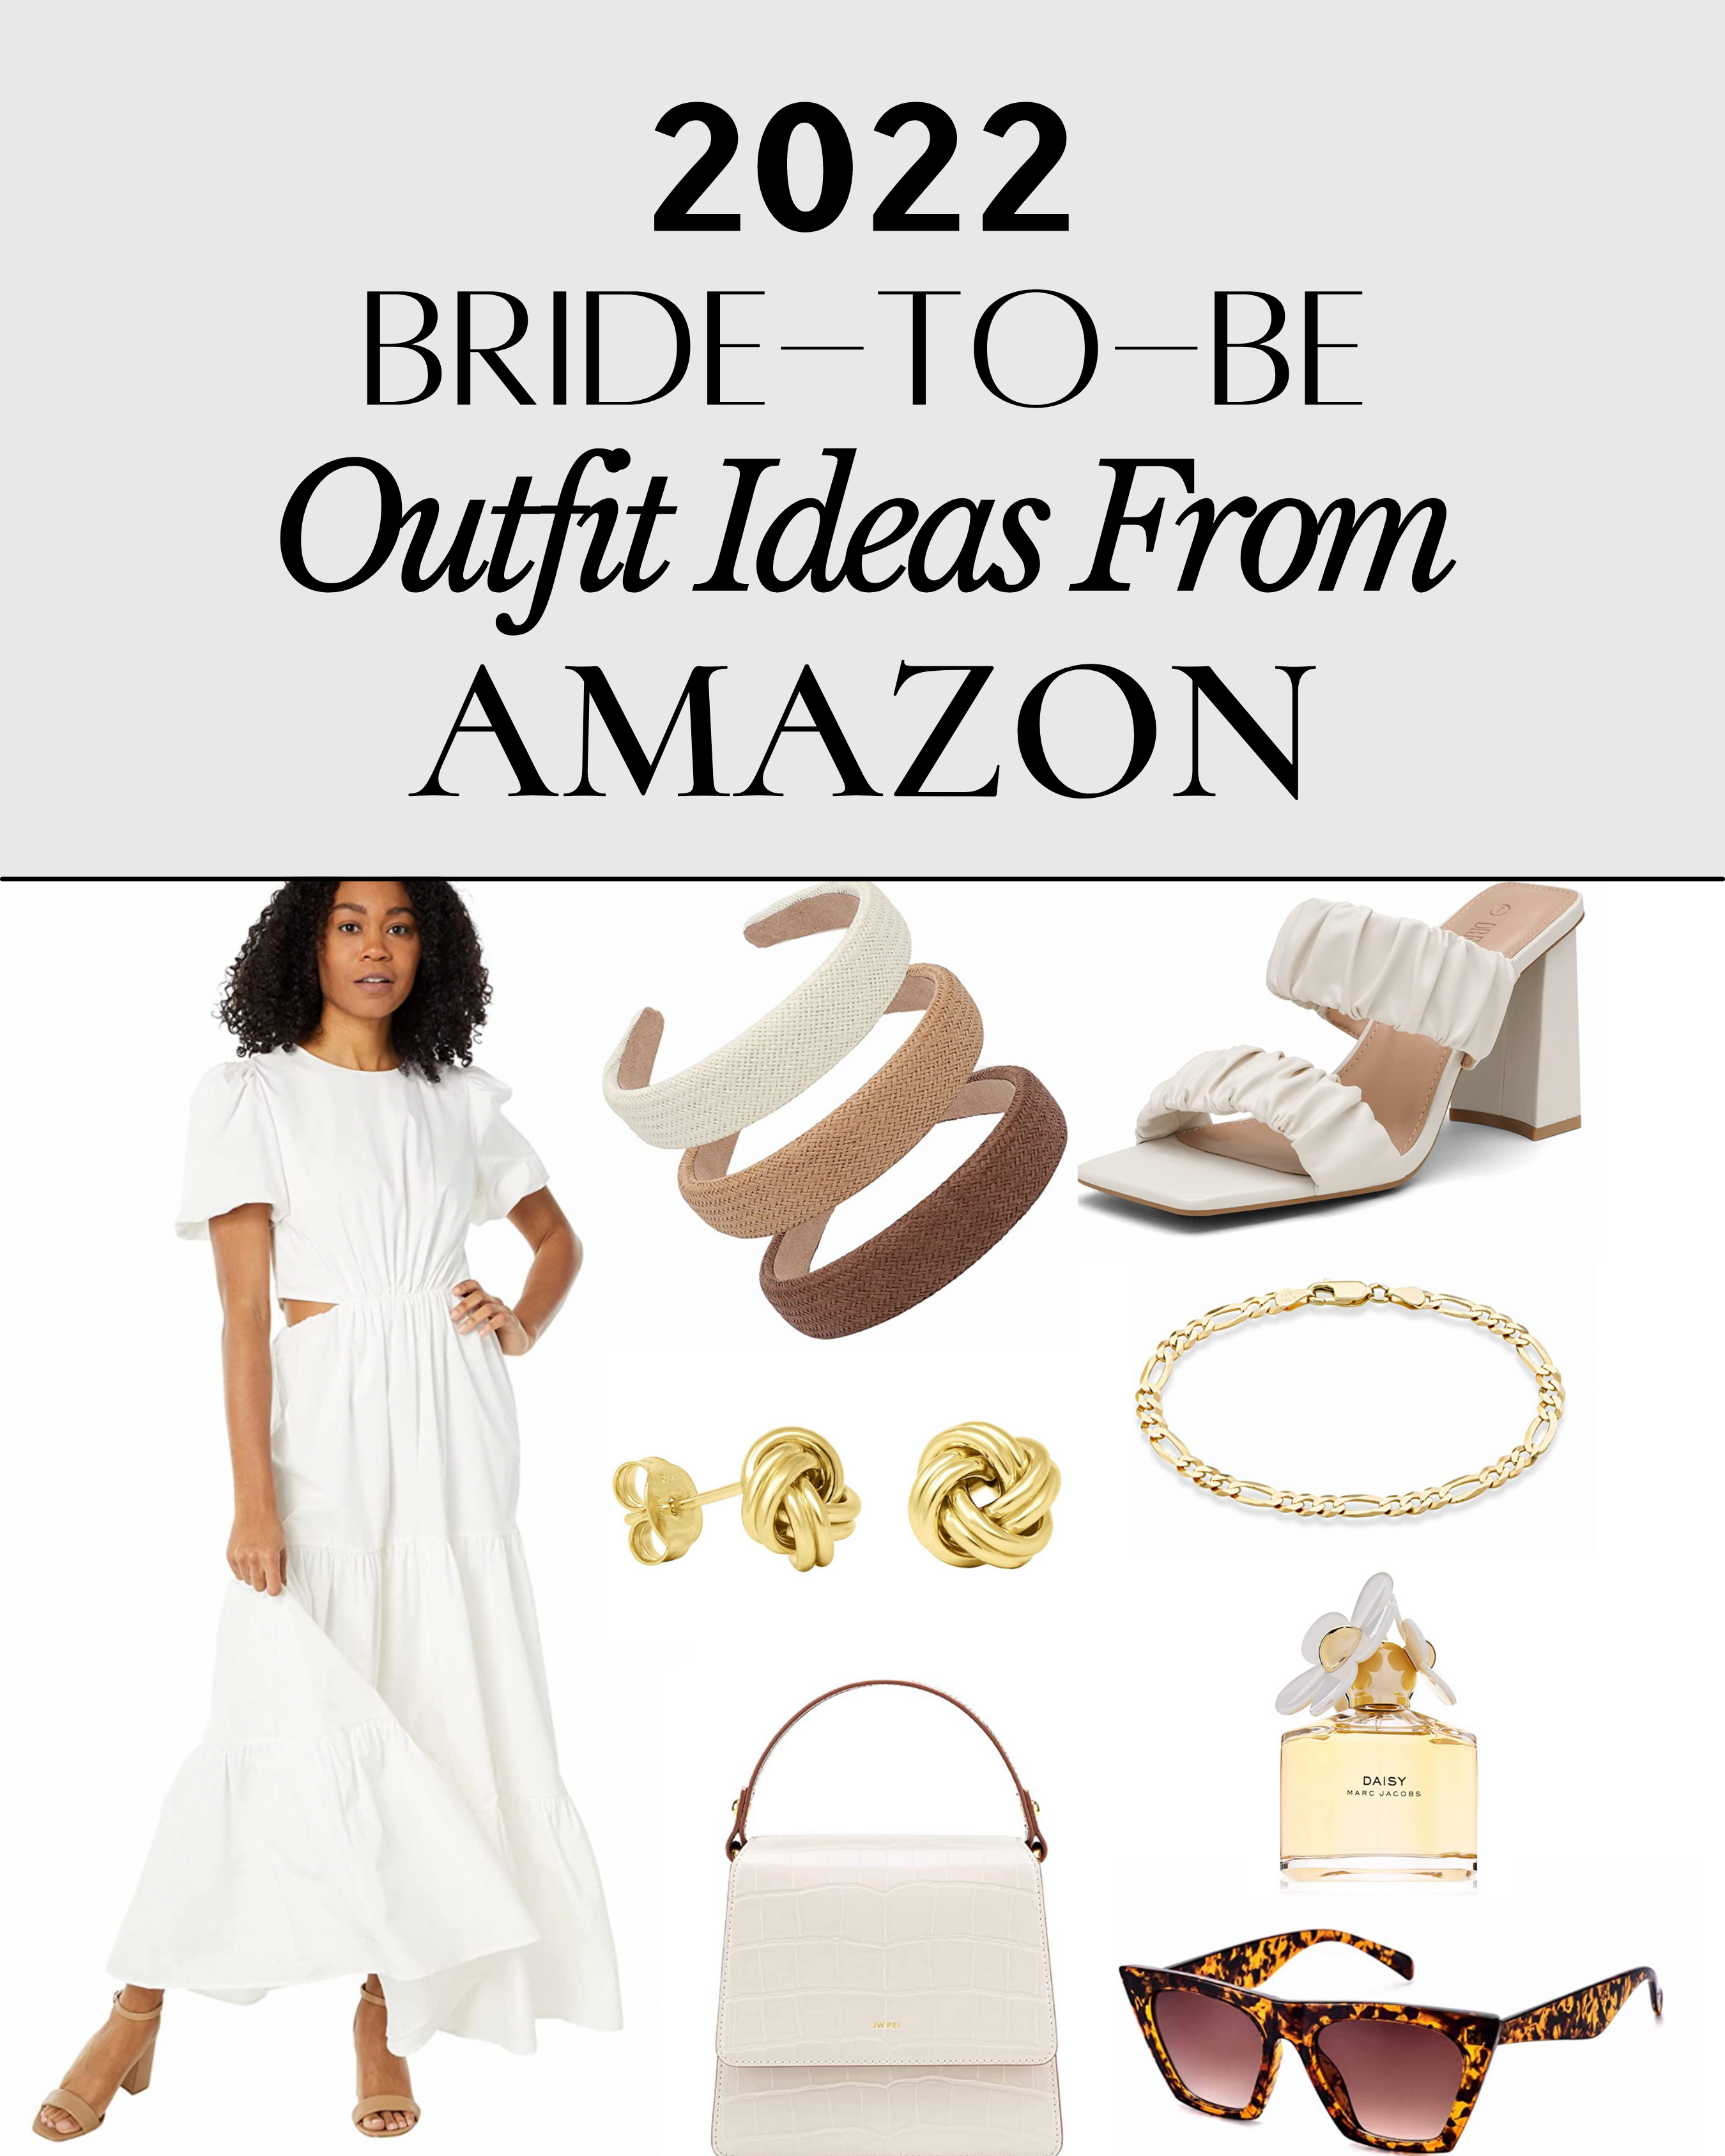 Trending and chic bride to be outfits from Amazon 2022.